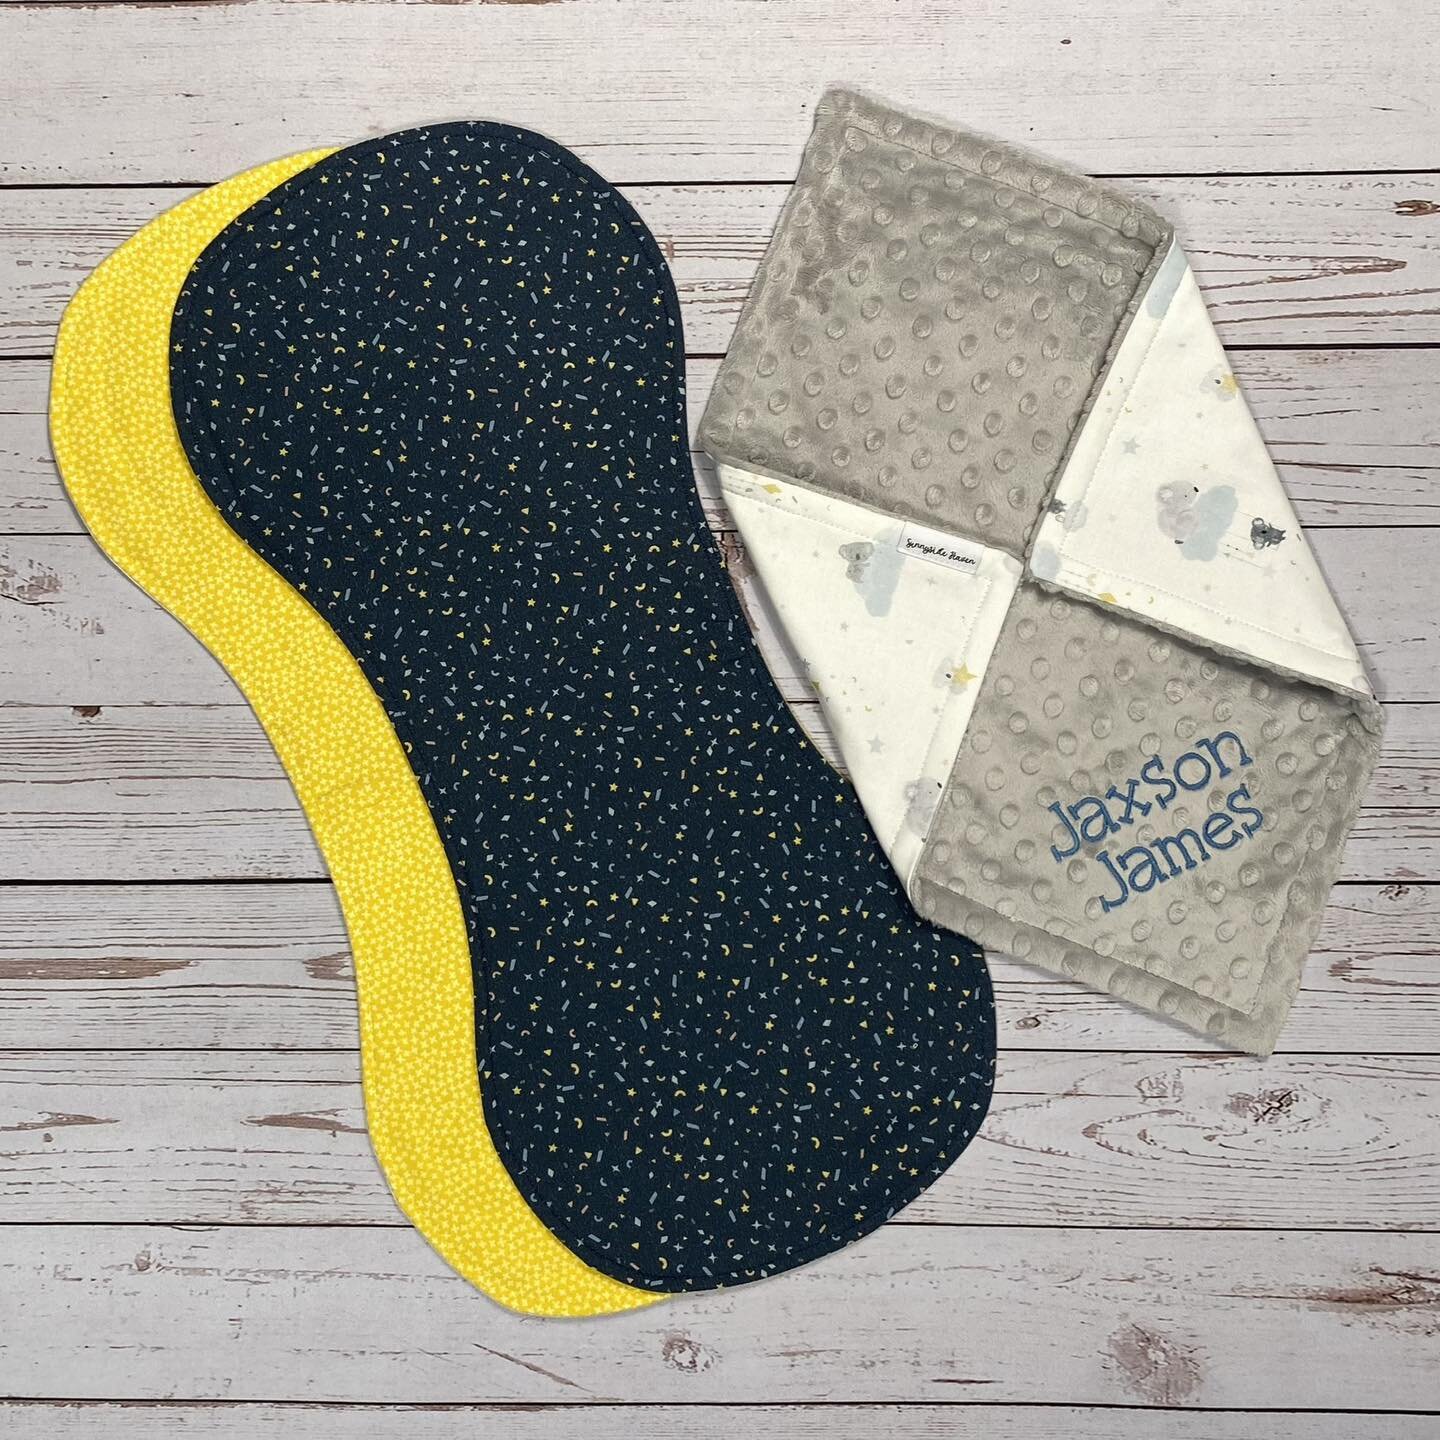 The koala themed lovey coordinates perfectly with this burp cloth set featuring a &lsquo;confetti&rsquo; print on navy blue and a yellow flannel 🐨🎉 #sunnysidehaven #newbabygift #newbabygiftideas #loveyblanket #koalababyshower #koalababies